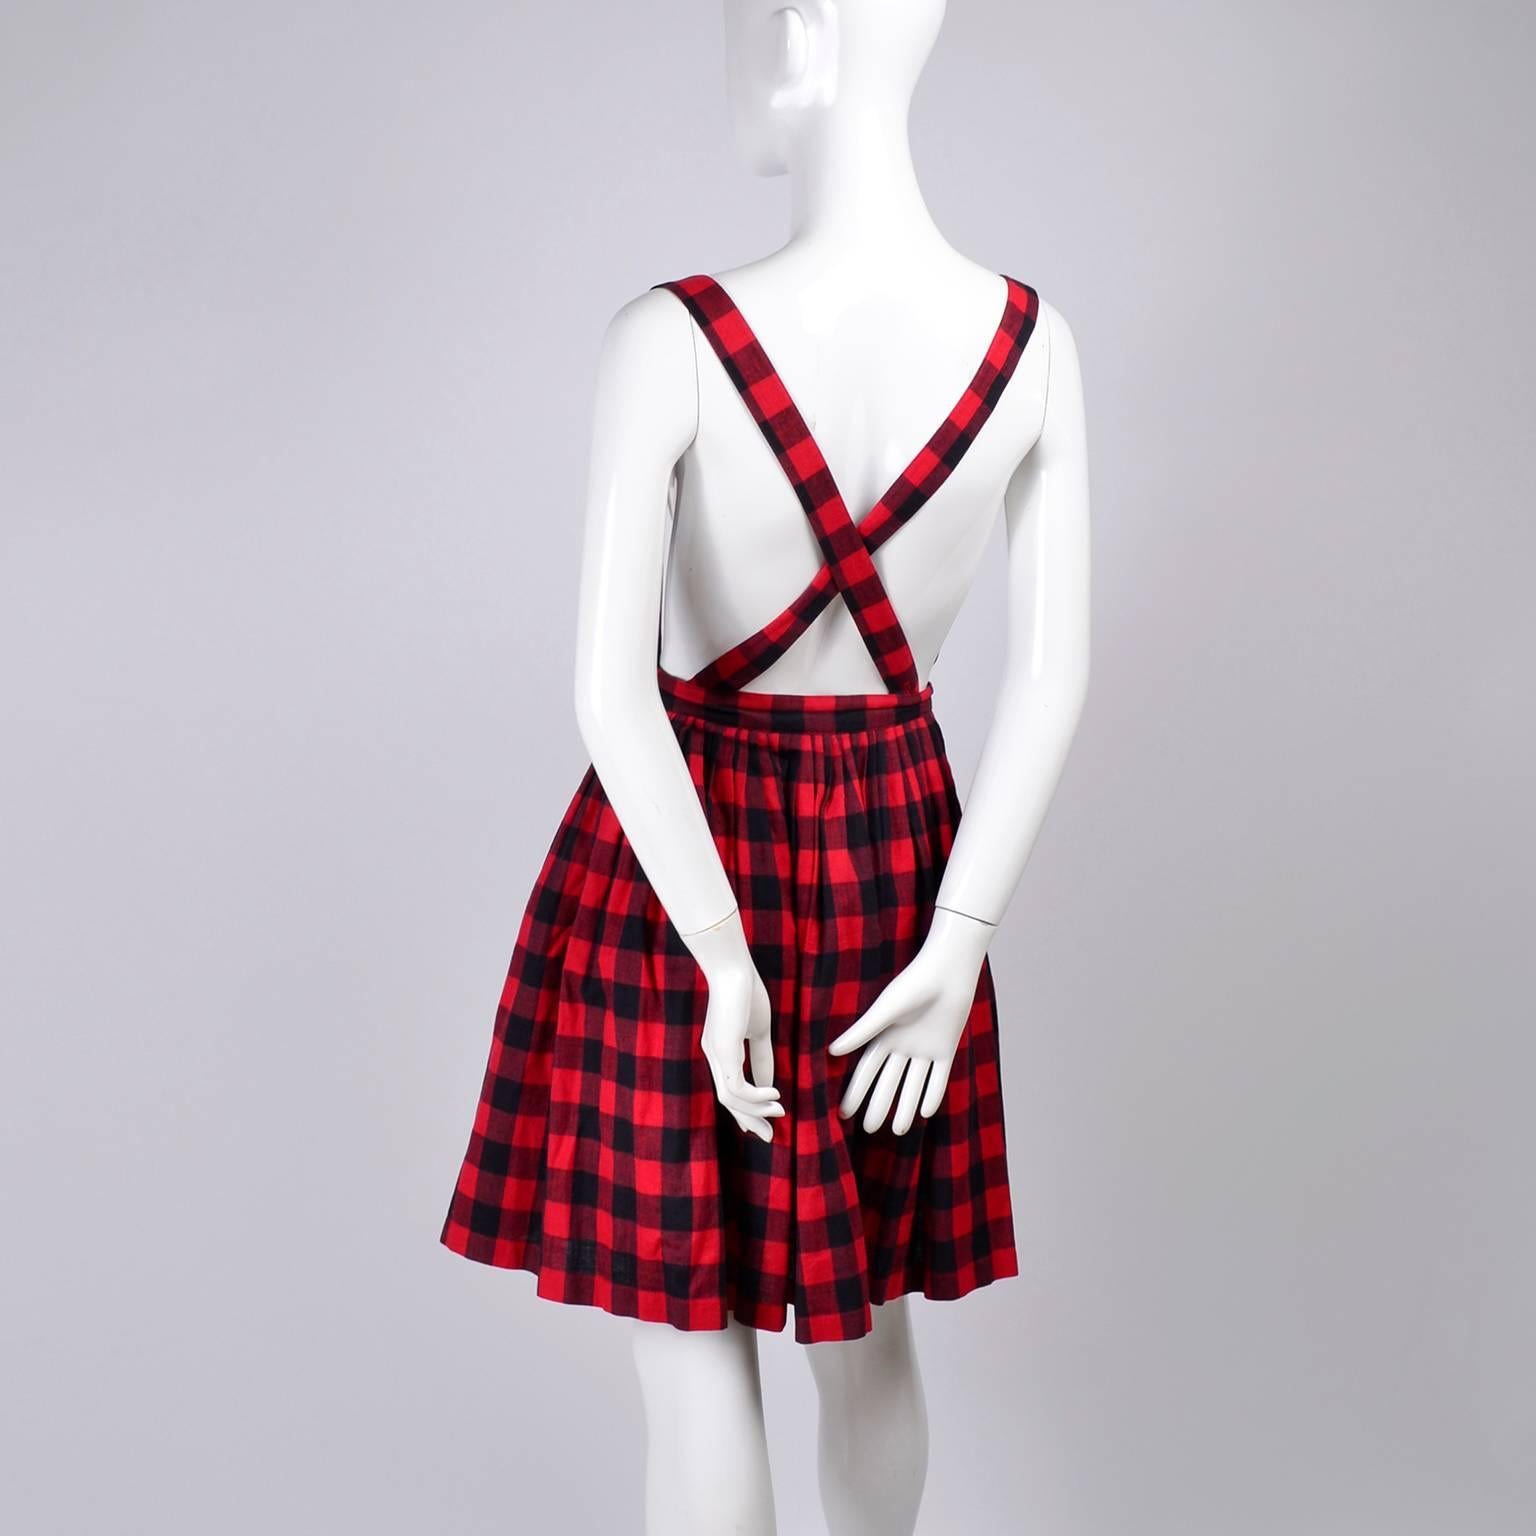 red plaid skirt with suspenders